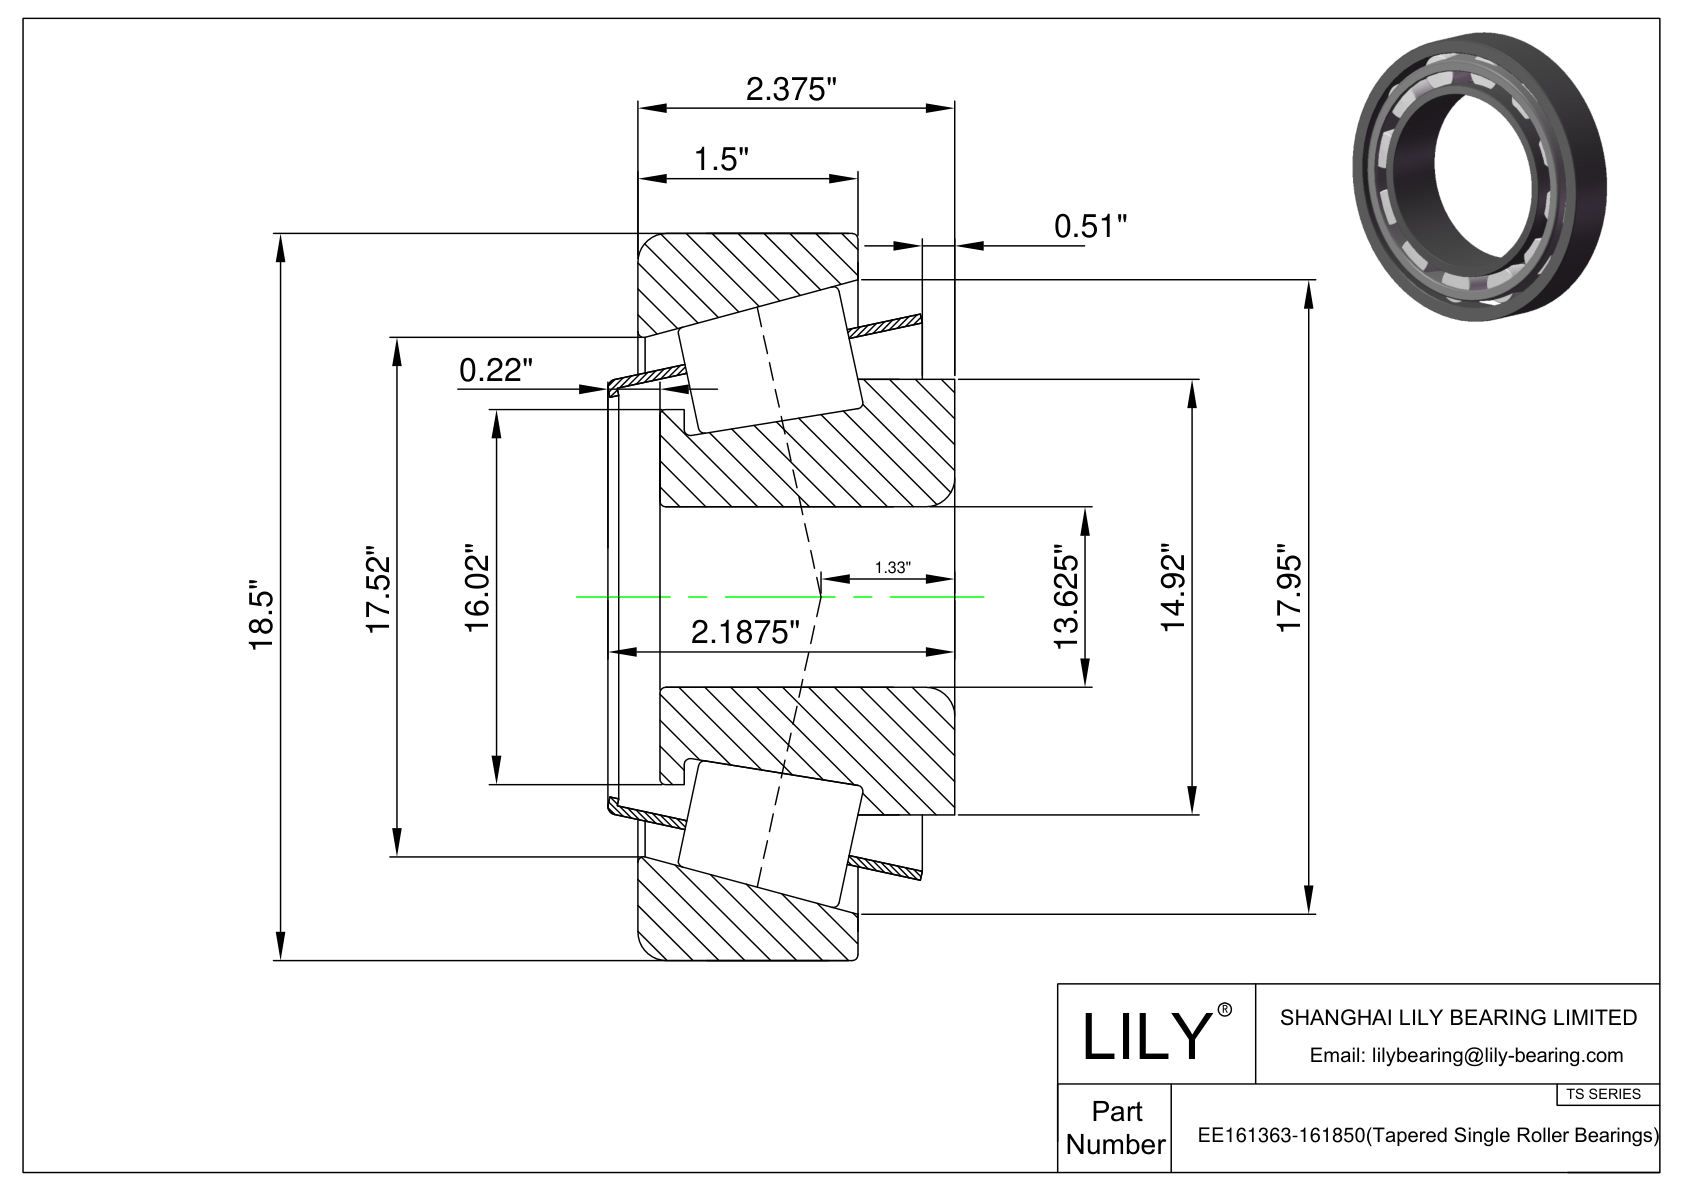 EE161363-161850 TS (Tapered Single Roller Bearings) (Imperial) cad drawing